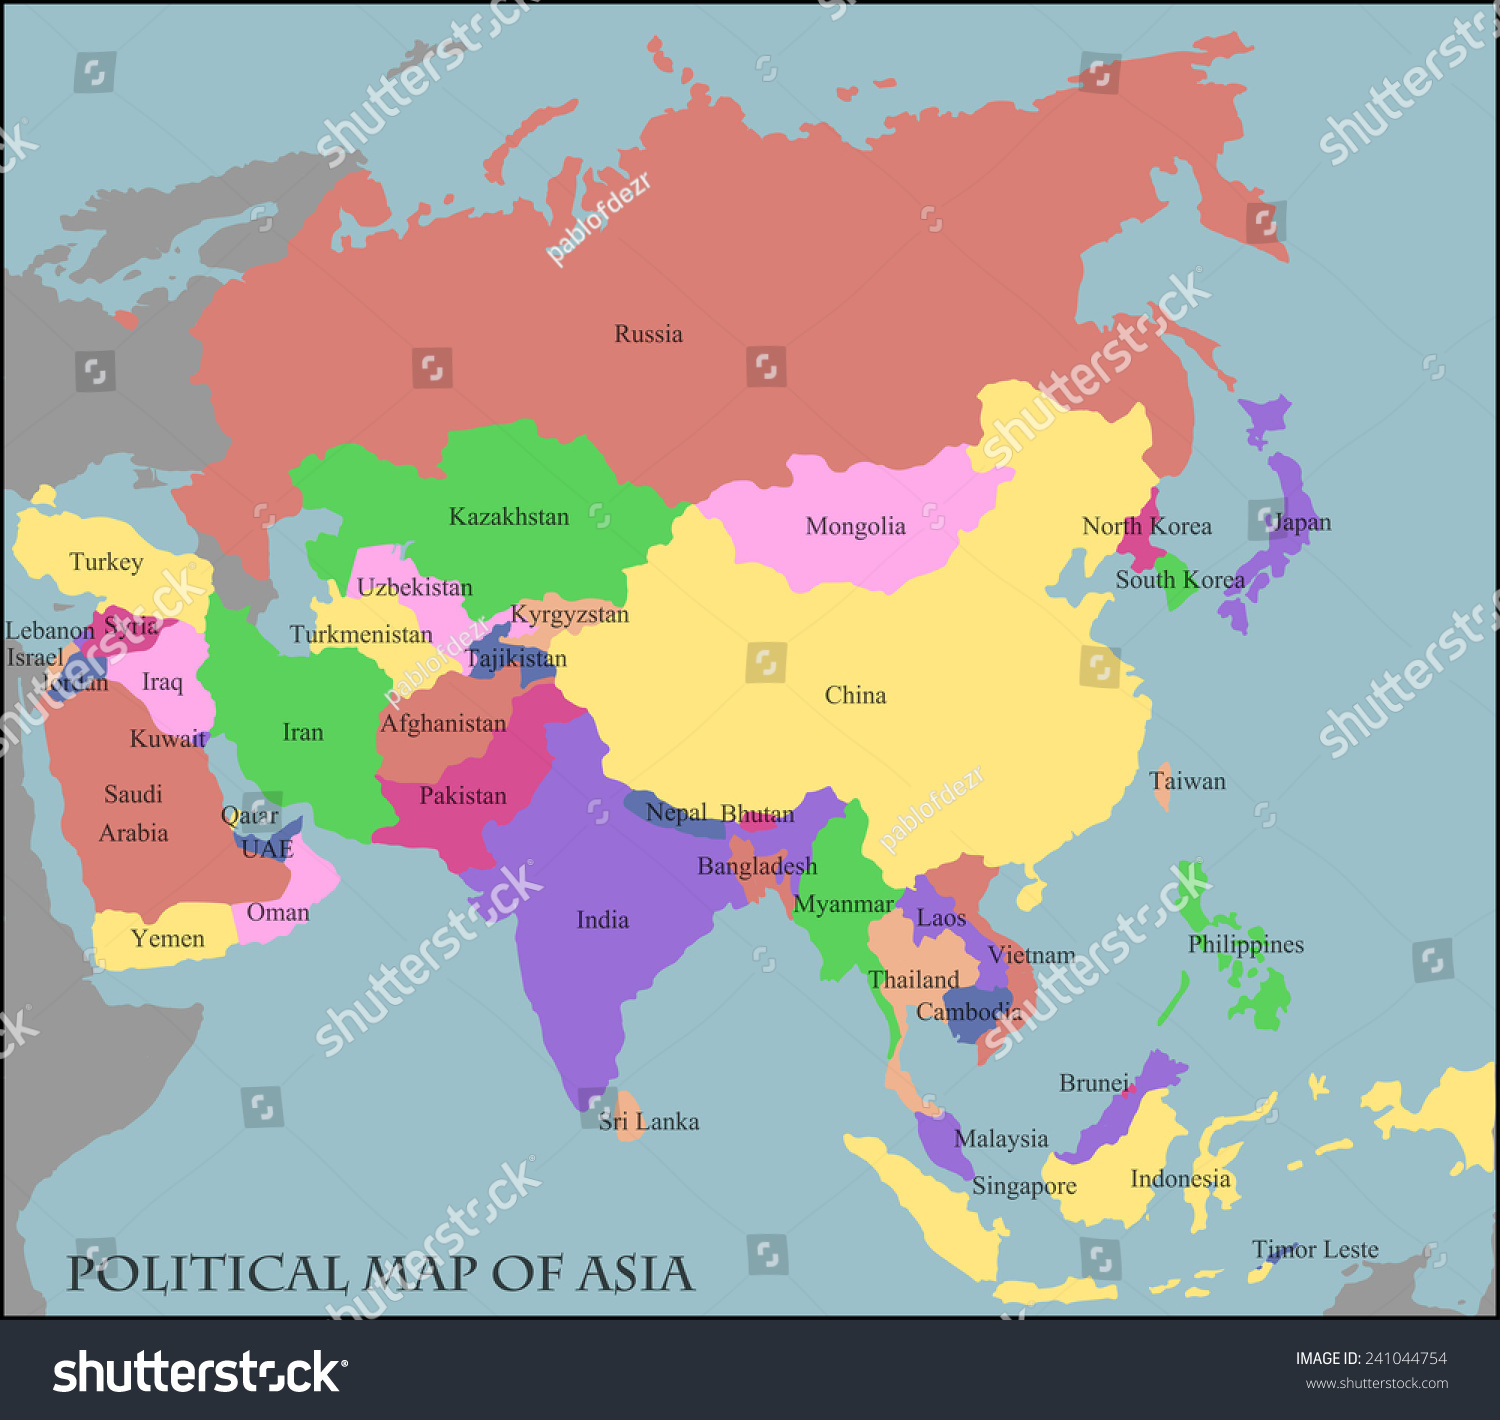 Political Map Of Asia Hd Political Map Asia Stock Vector (Royalty Free) 241044754 | Shutterstock